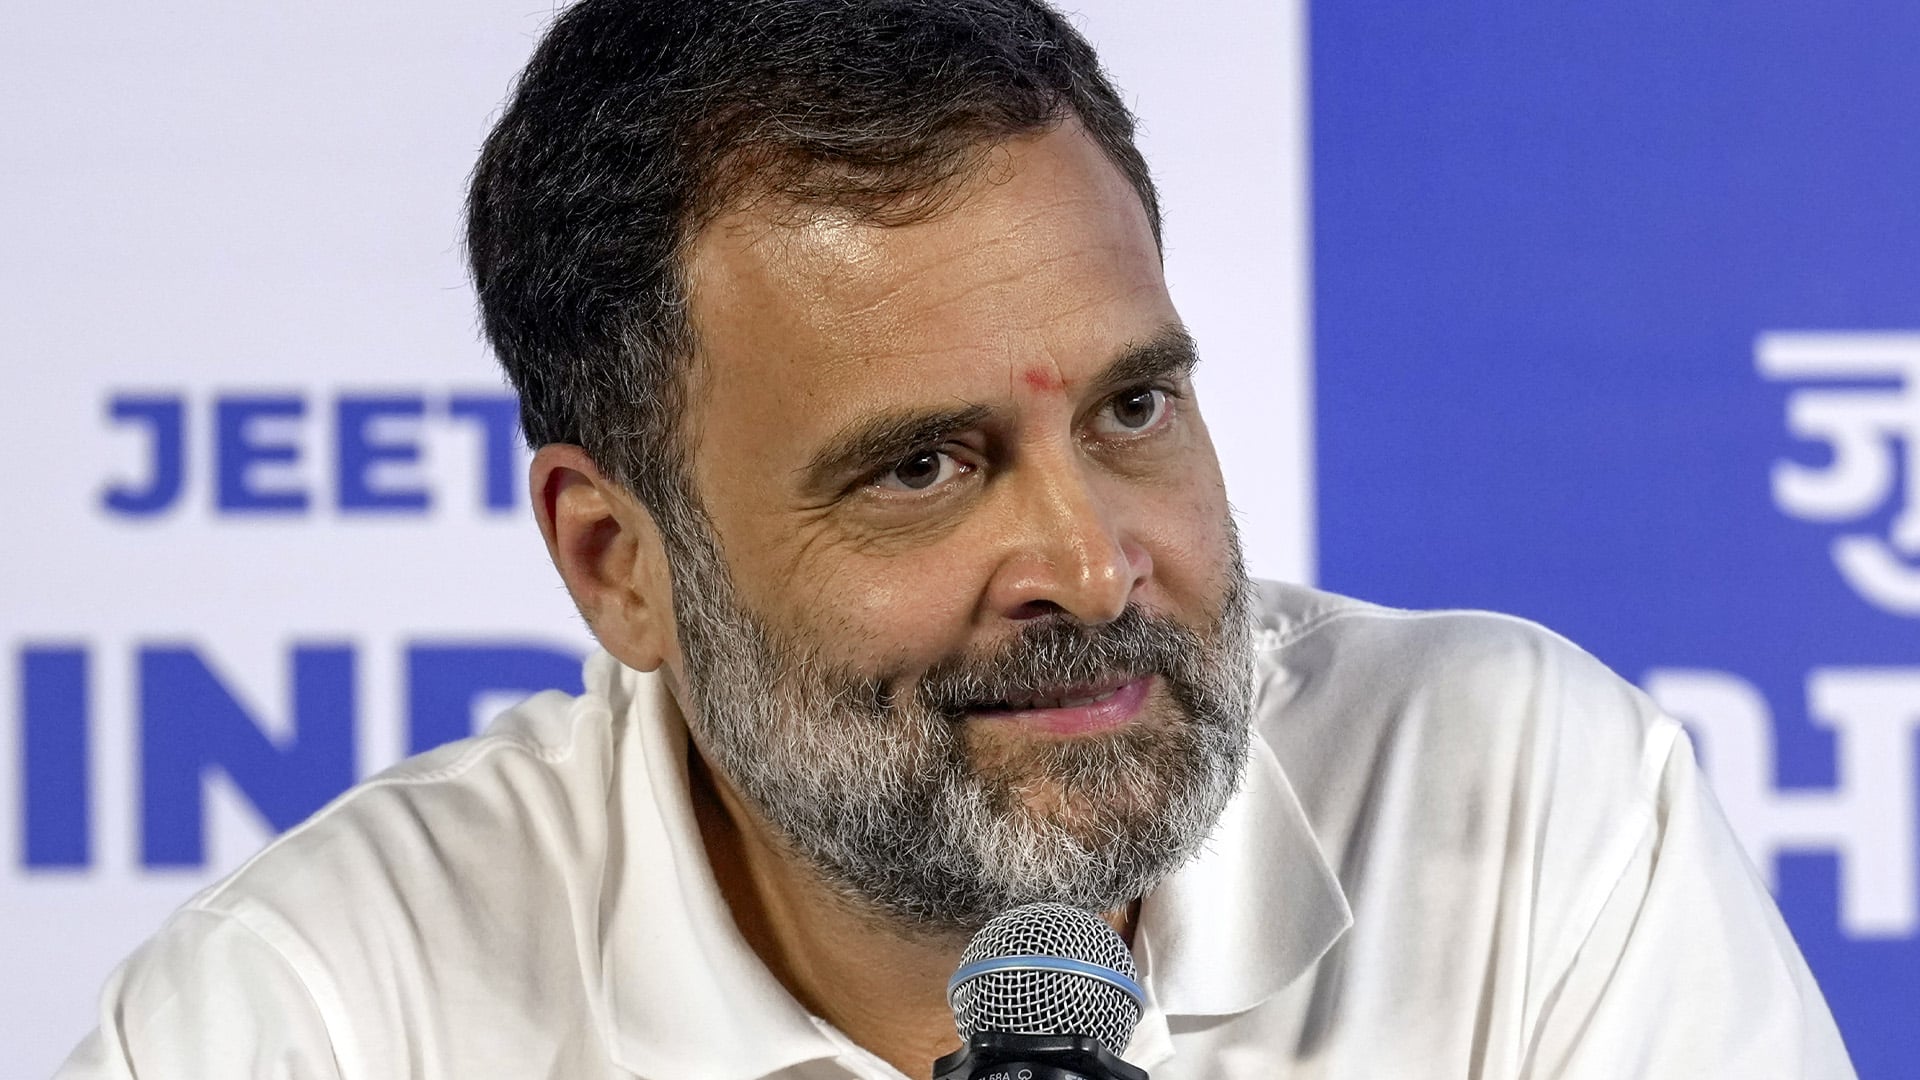 India reputation at stake ahead of G20 summit; PM must come clean on Adani issue: Rahul